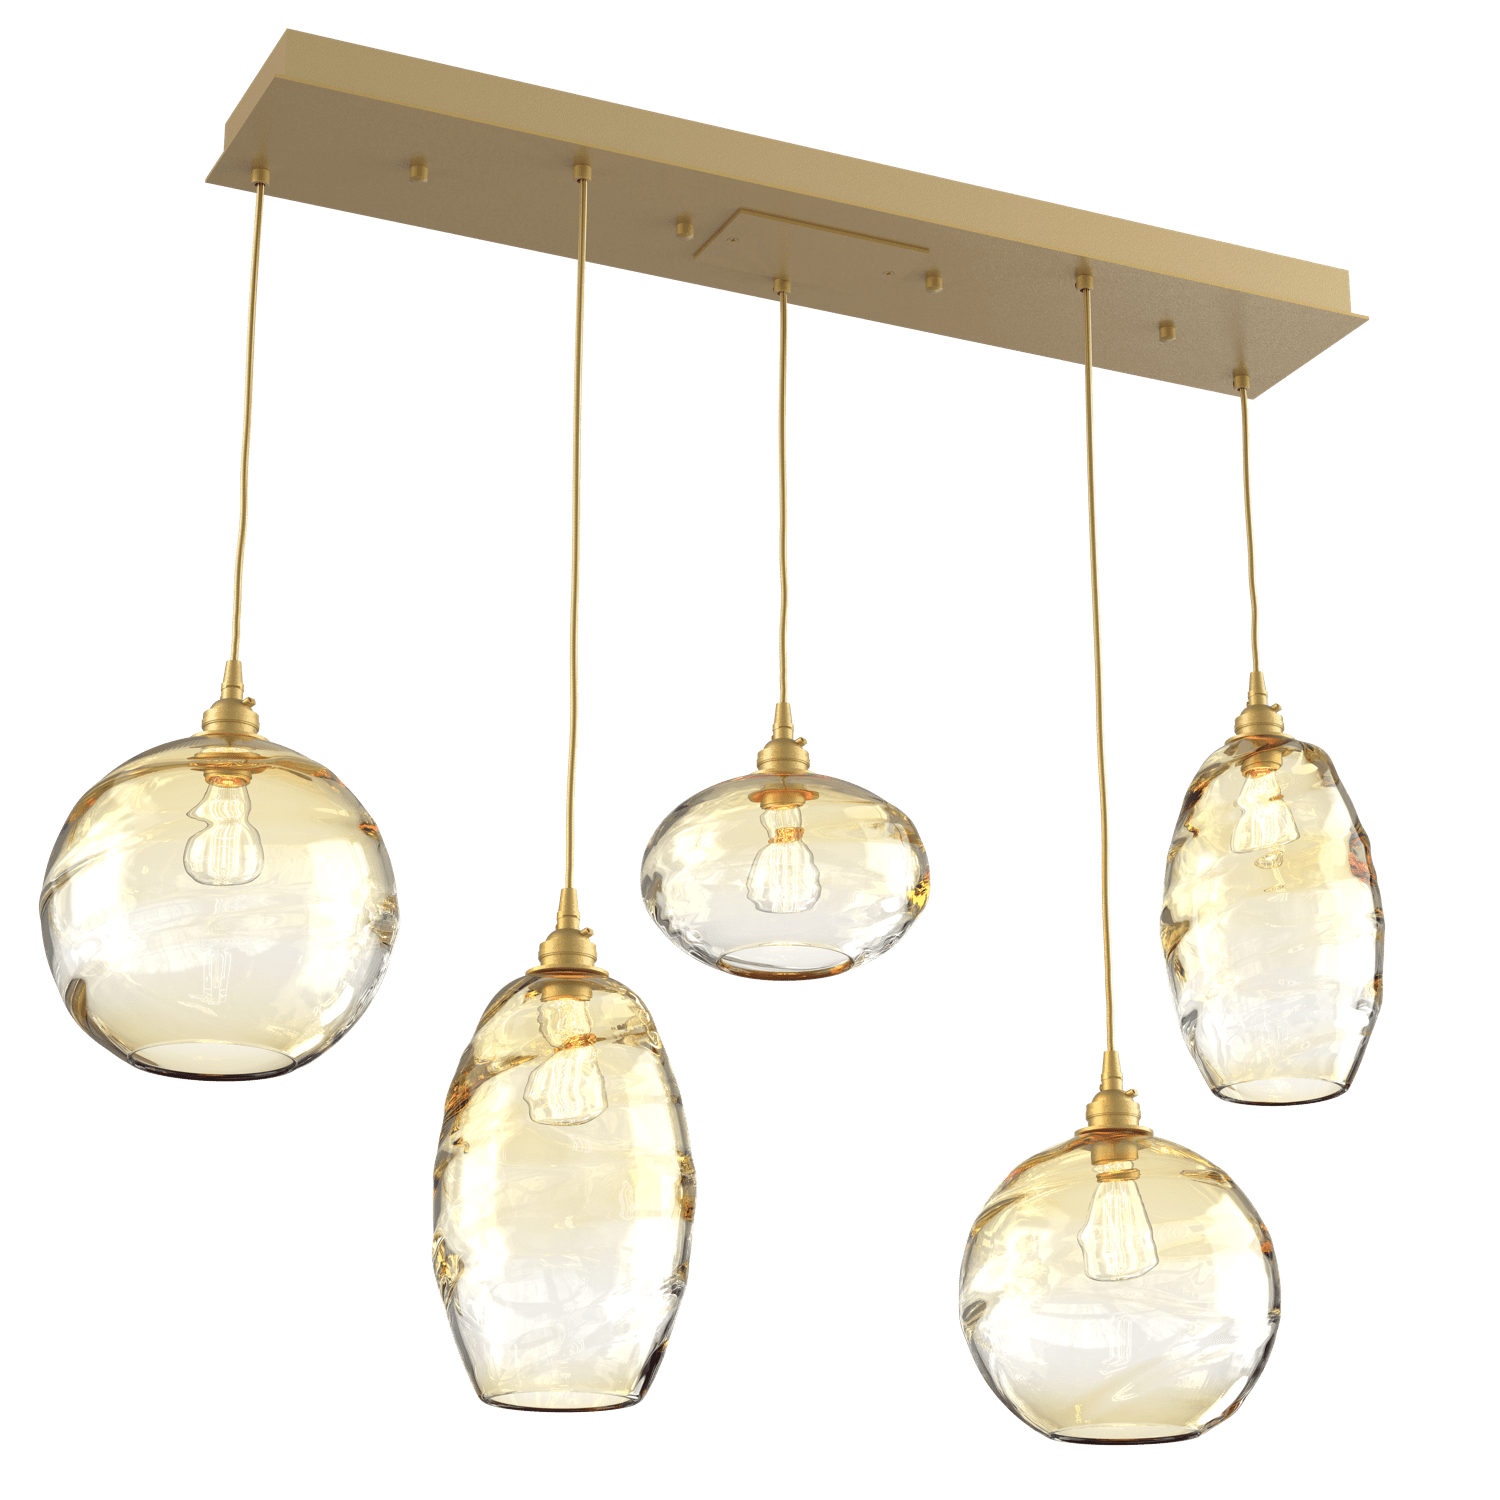 PLB0048-05-GB-OA-Hammerton-Studio-Optic-Blown-Glass-Misto-5-light-linear-pendant-chandelier-with-gilded-brass-finish-and-optic-amber-blown-glass-shades-and-incandescent-lamping